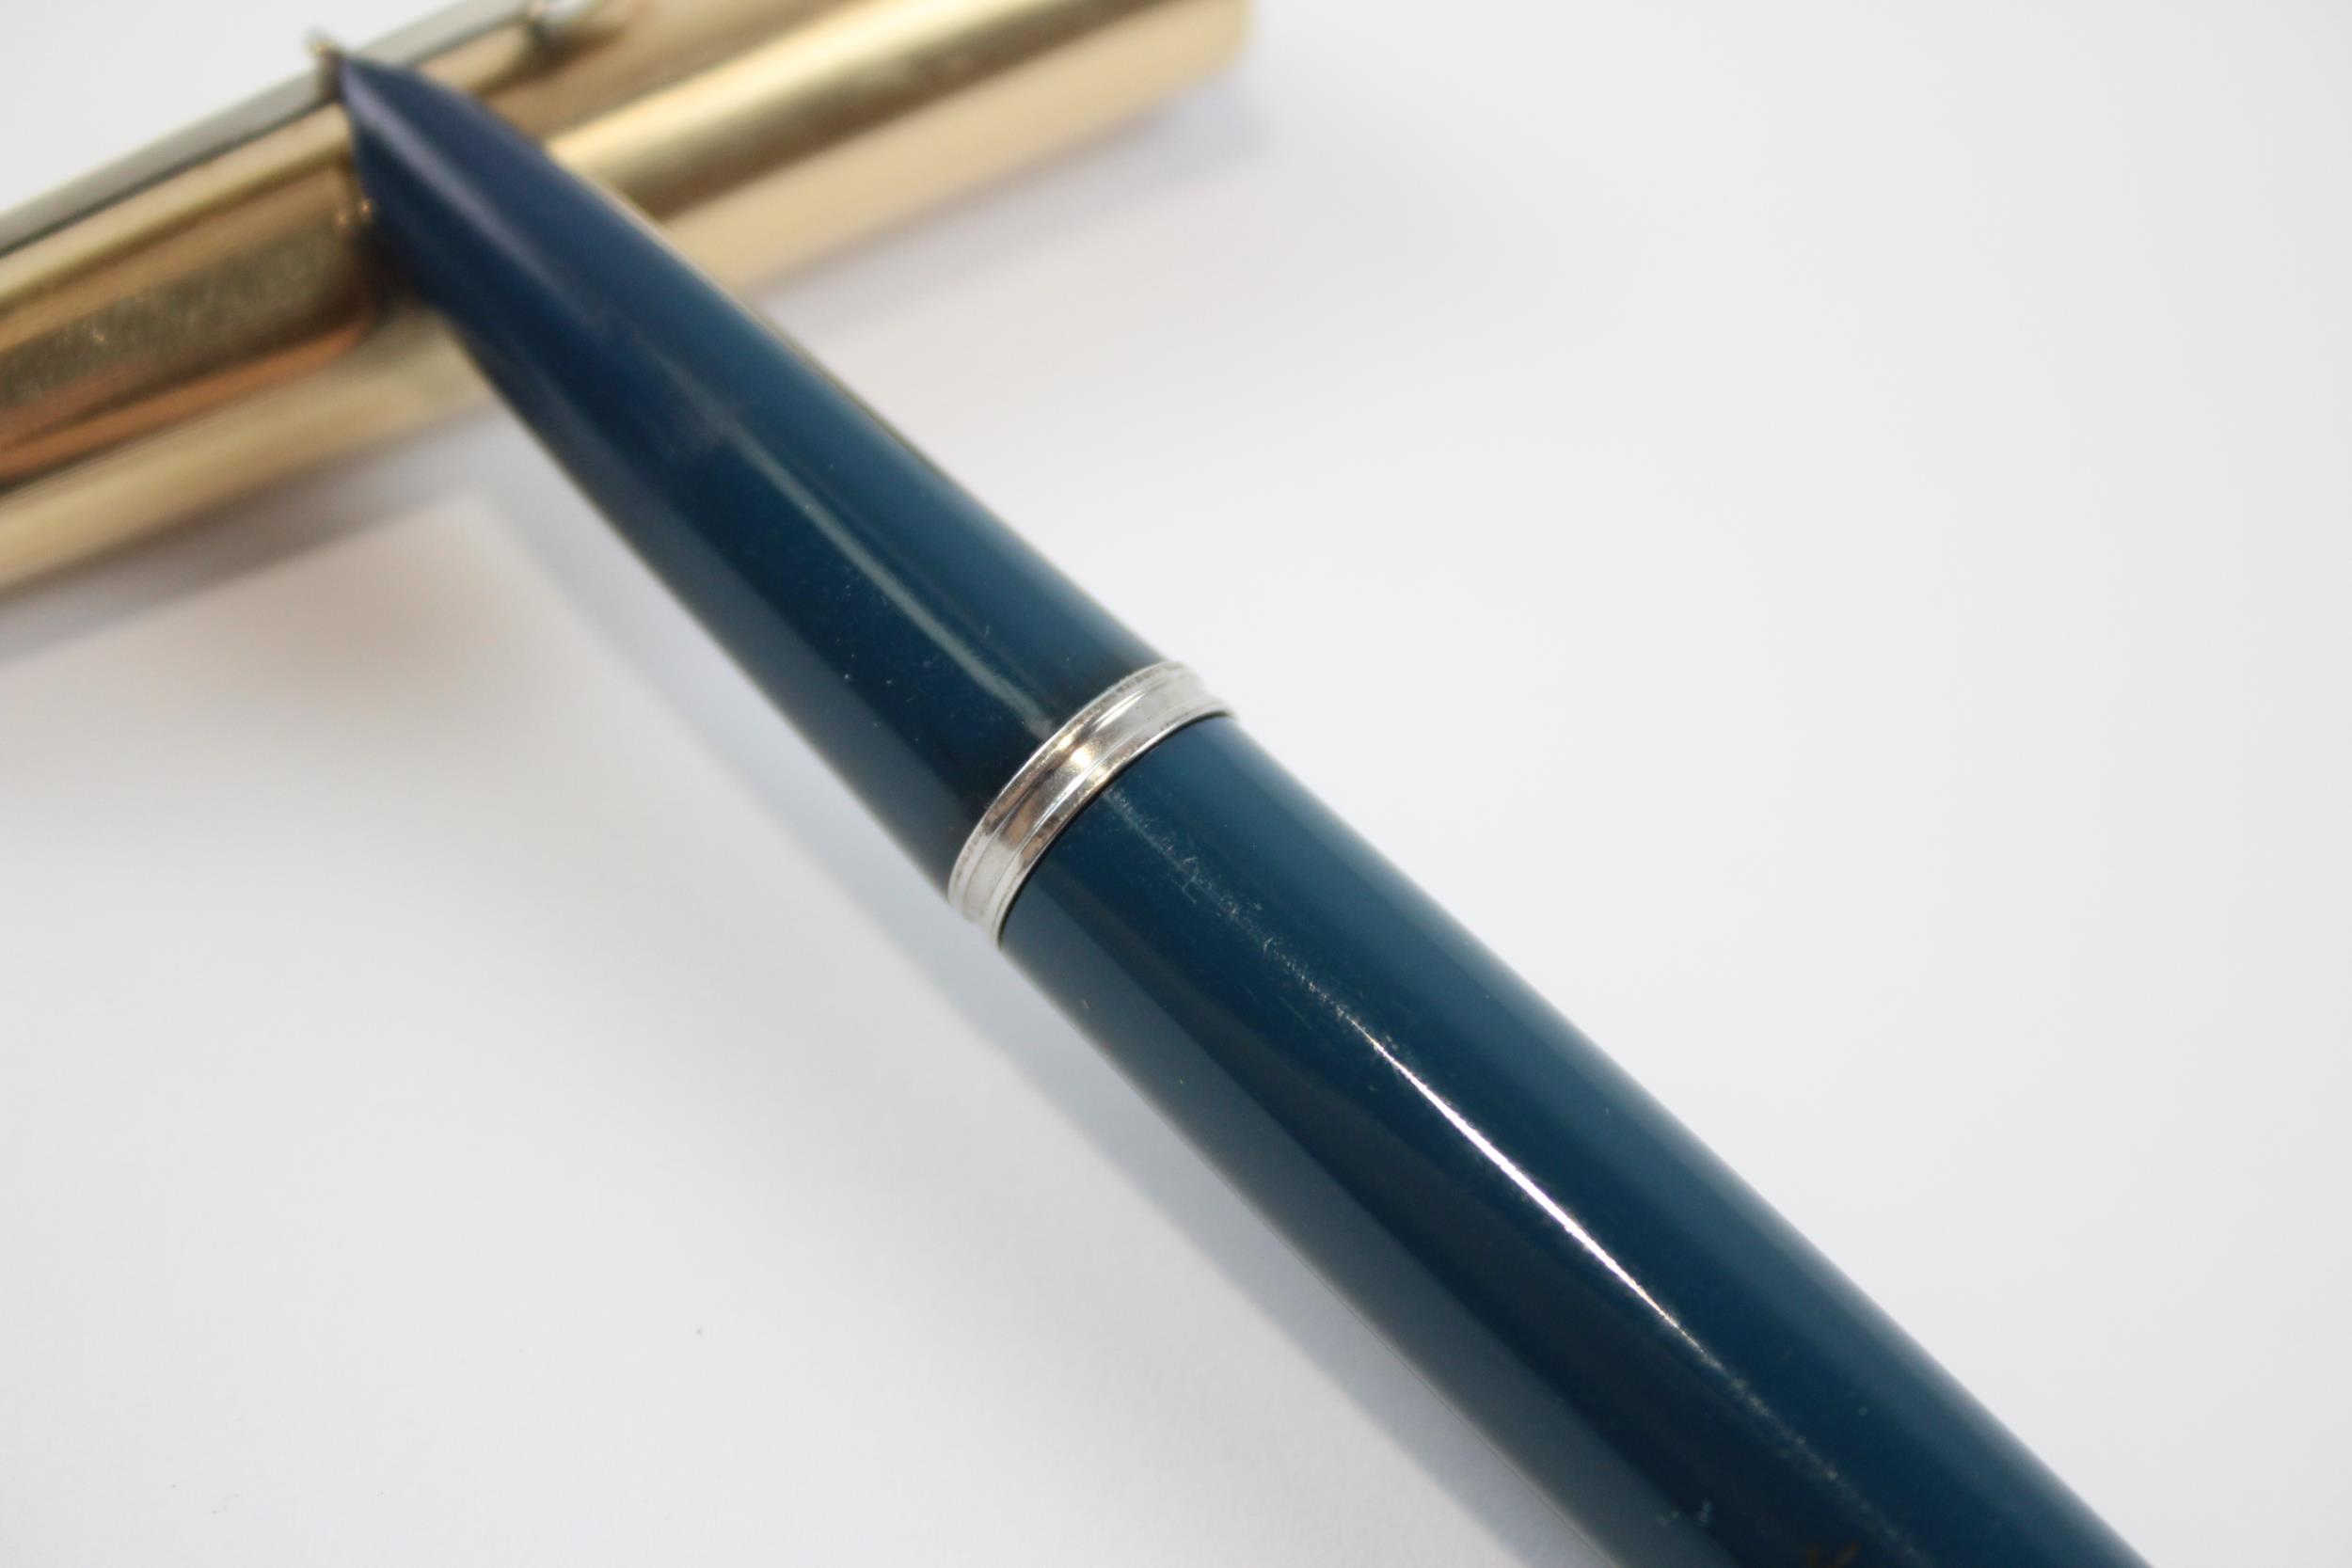 Vintage Parker 51 Teal Fountain Pen w/ 14ct Gold Nib, Gold Plate Cap WRITING // Dip Tested & Writing - Image 3 of 4